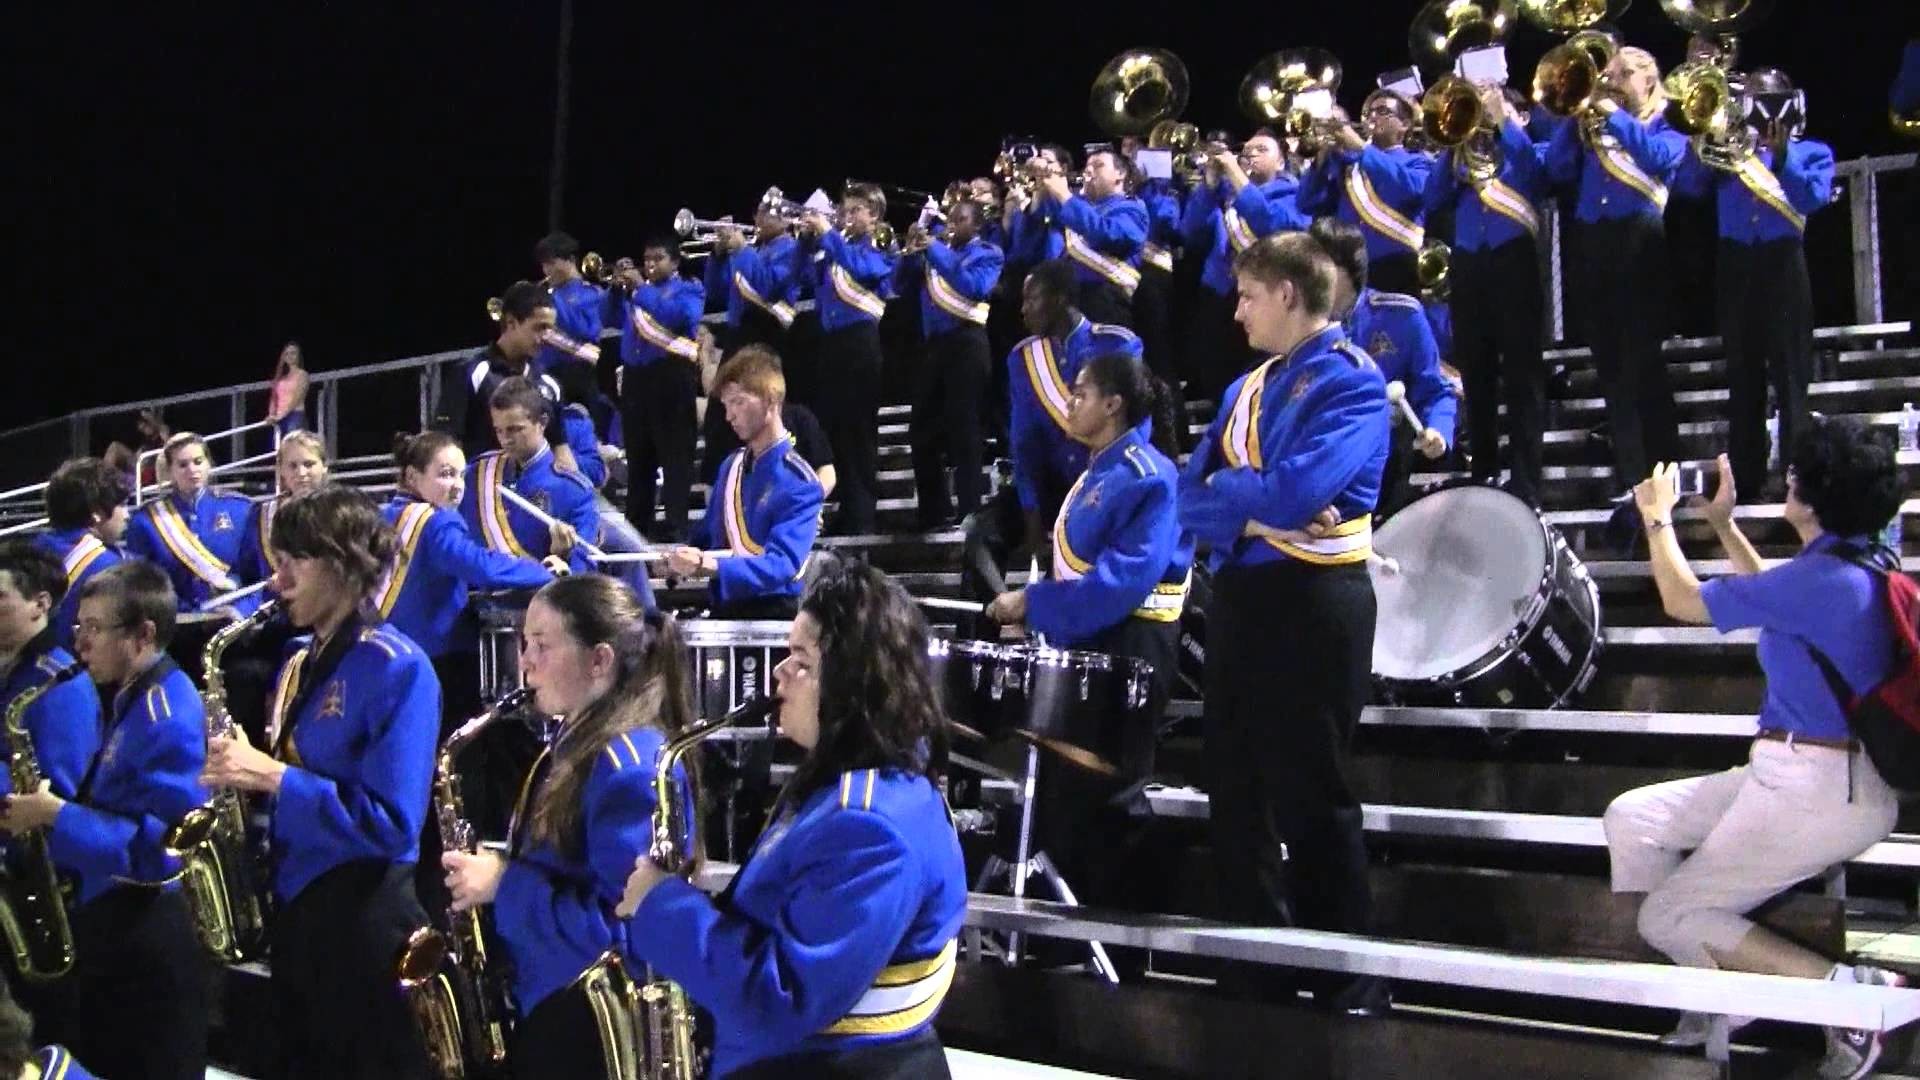 1920x1080 Final Countdown - Martin County High School Marching Band - Stand Tunes 2013